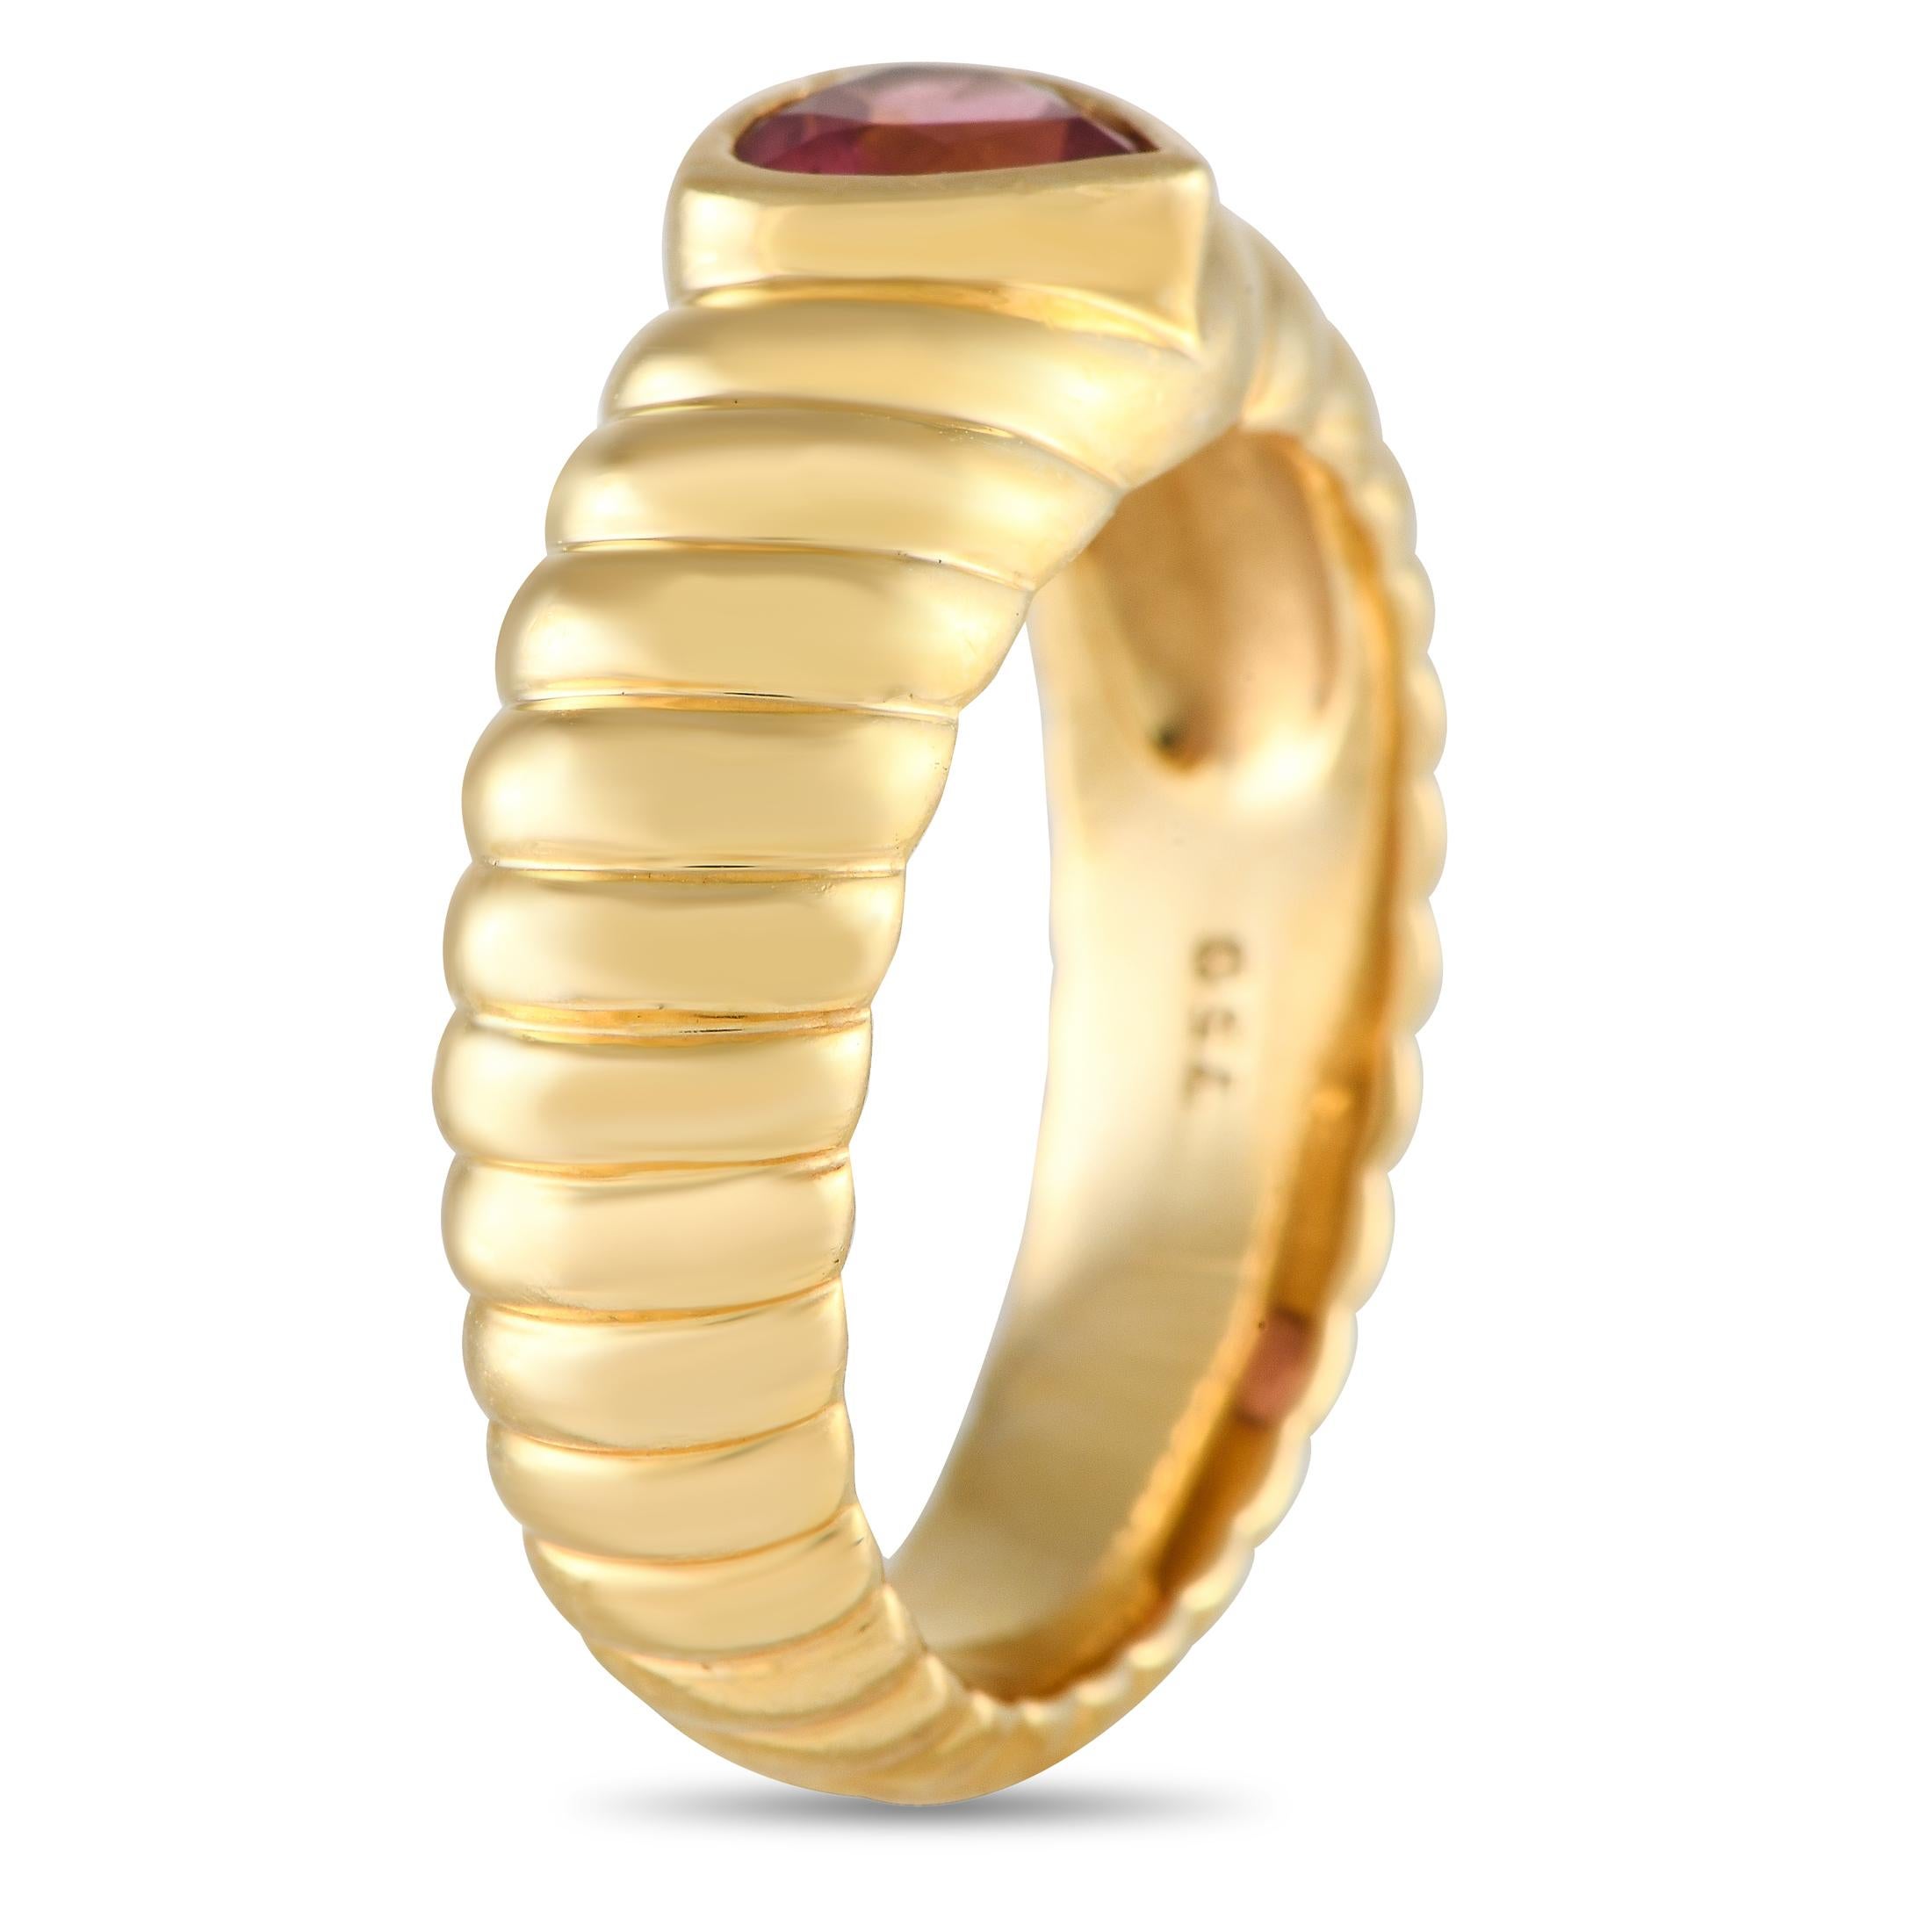 This charming Tiffany & Co. ring will continually capture your imagination. At the center of the textured 18K Yellow Gold setting, a heart-shaped Tourmaline gemstone makes it simply unforgettable. It features a band width and top height both